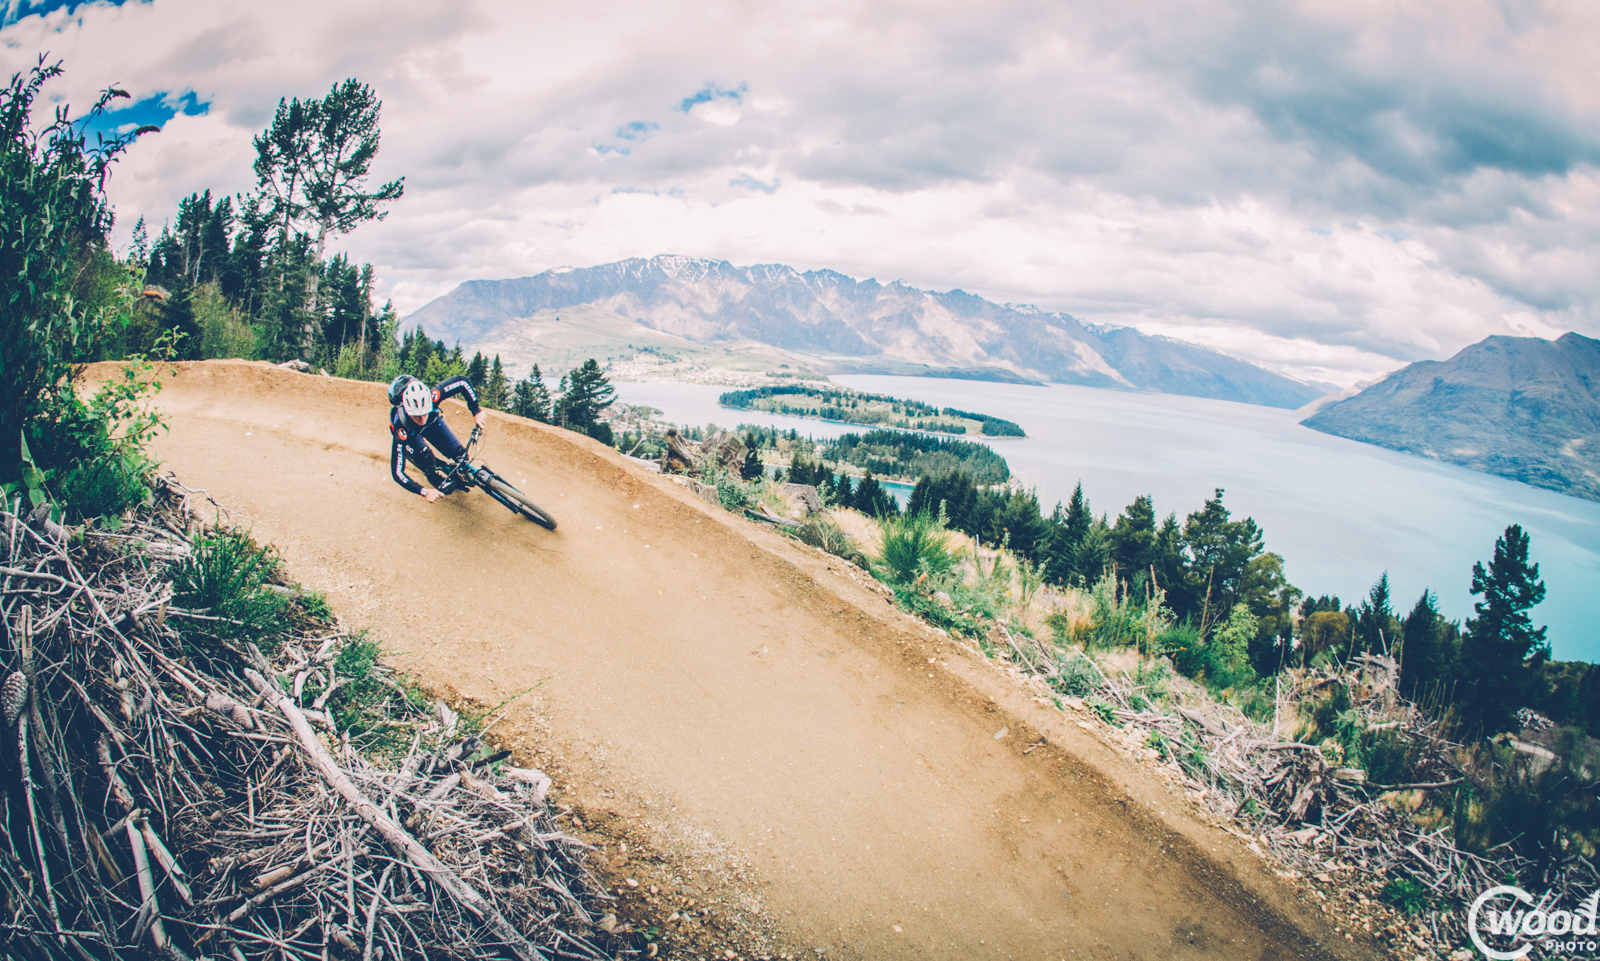 Queenstown rider Tim Ceci takes on one  of the most scenic MTB corners in the world ­ on Queenstown Bike Park¹s Thundergoat trail. Photo by Callum Wood